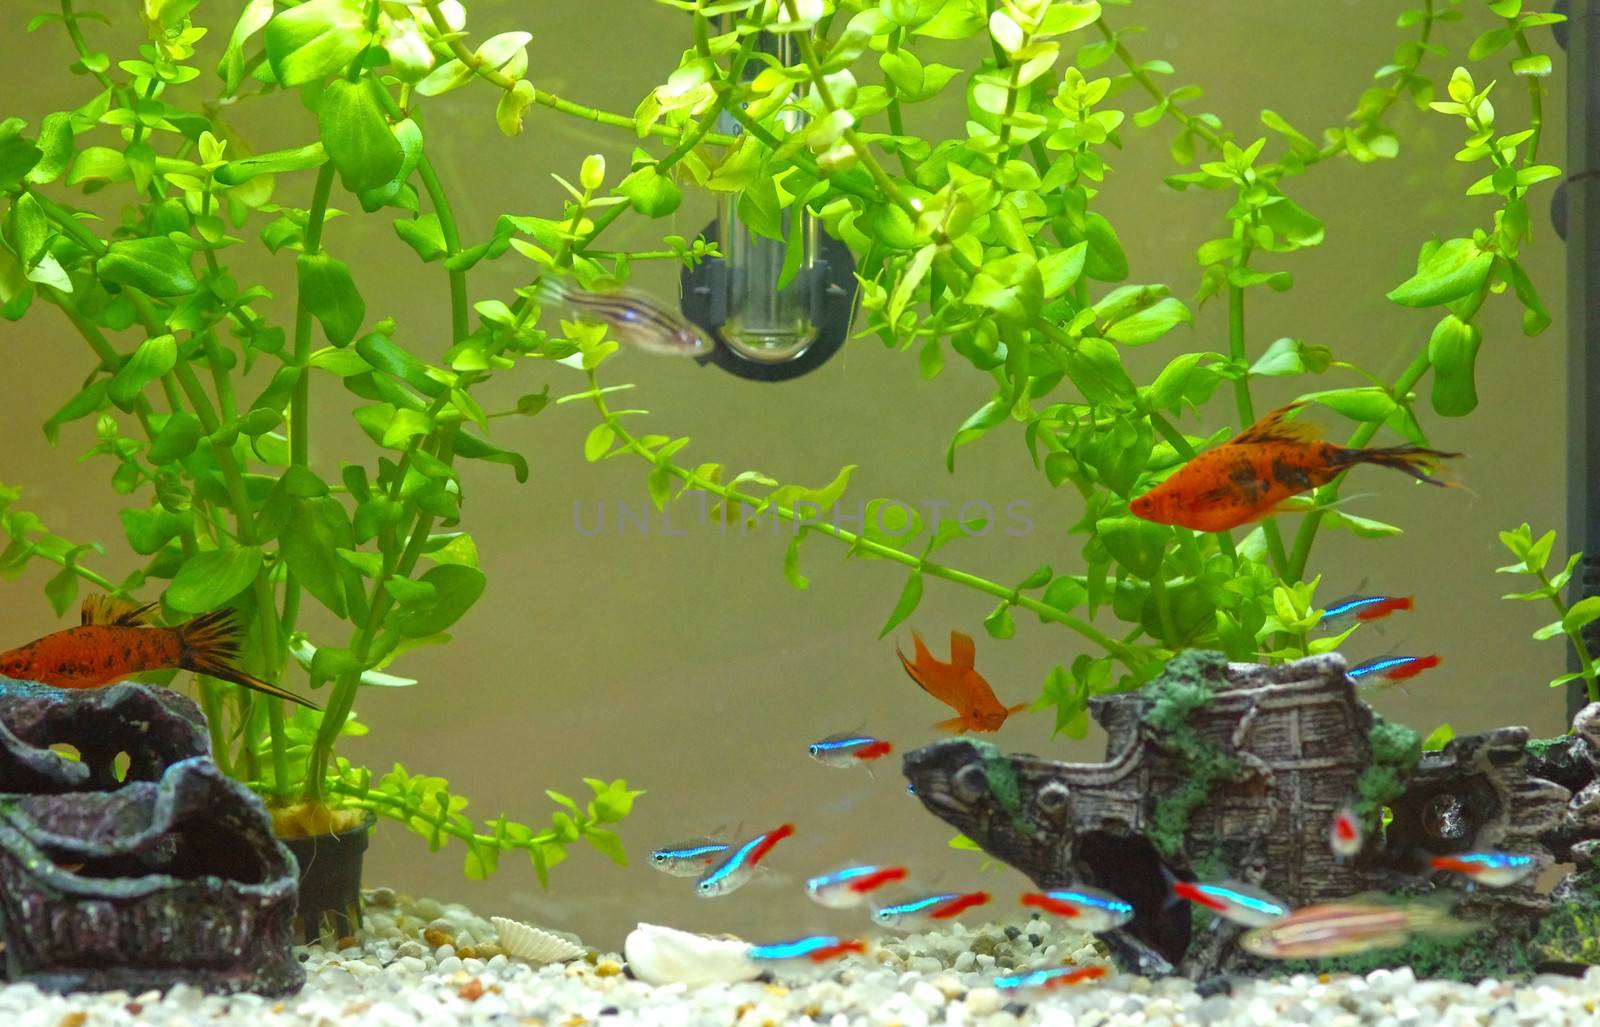 Decorative home aquarium with fishes and plants.